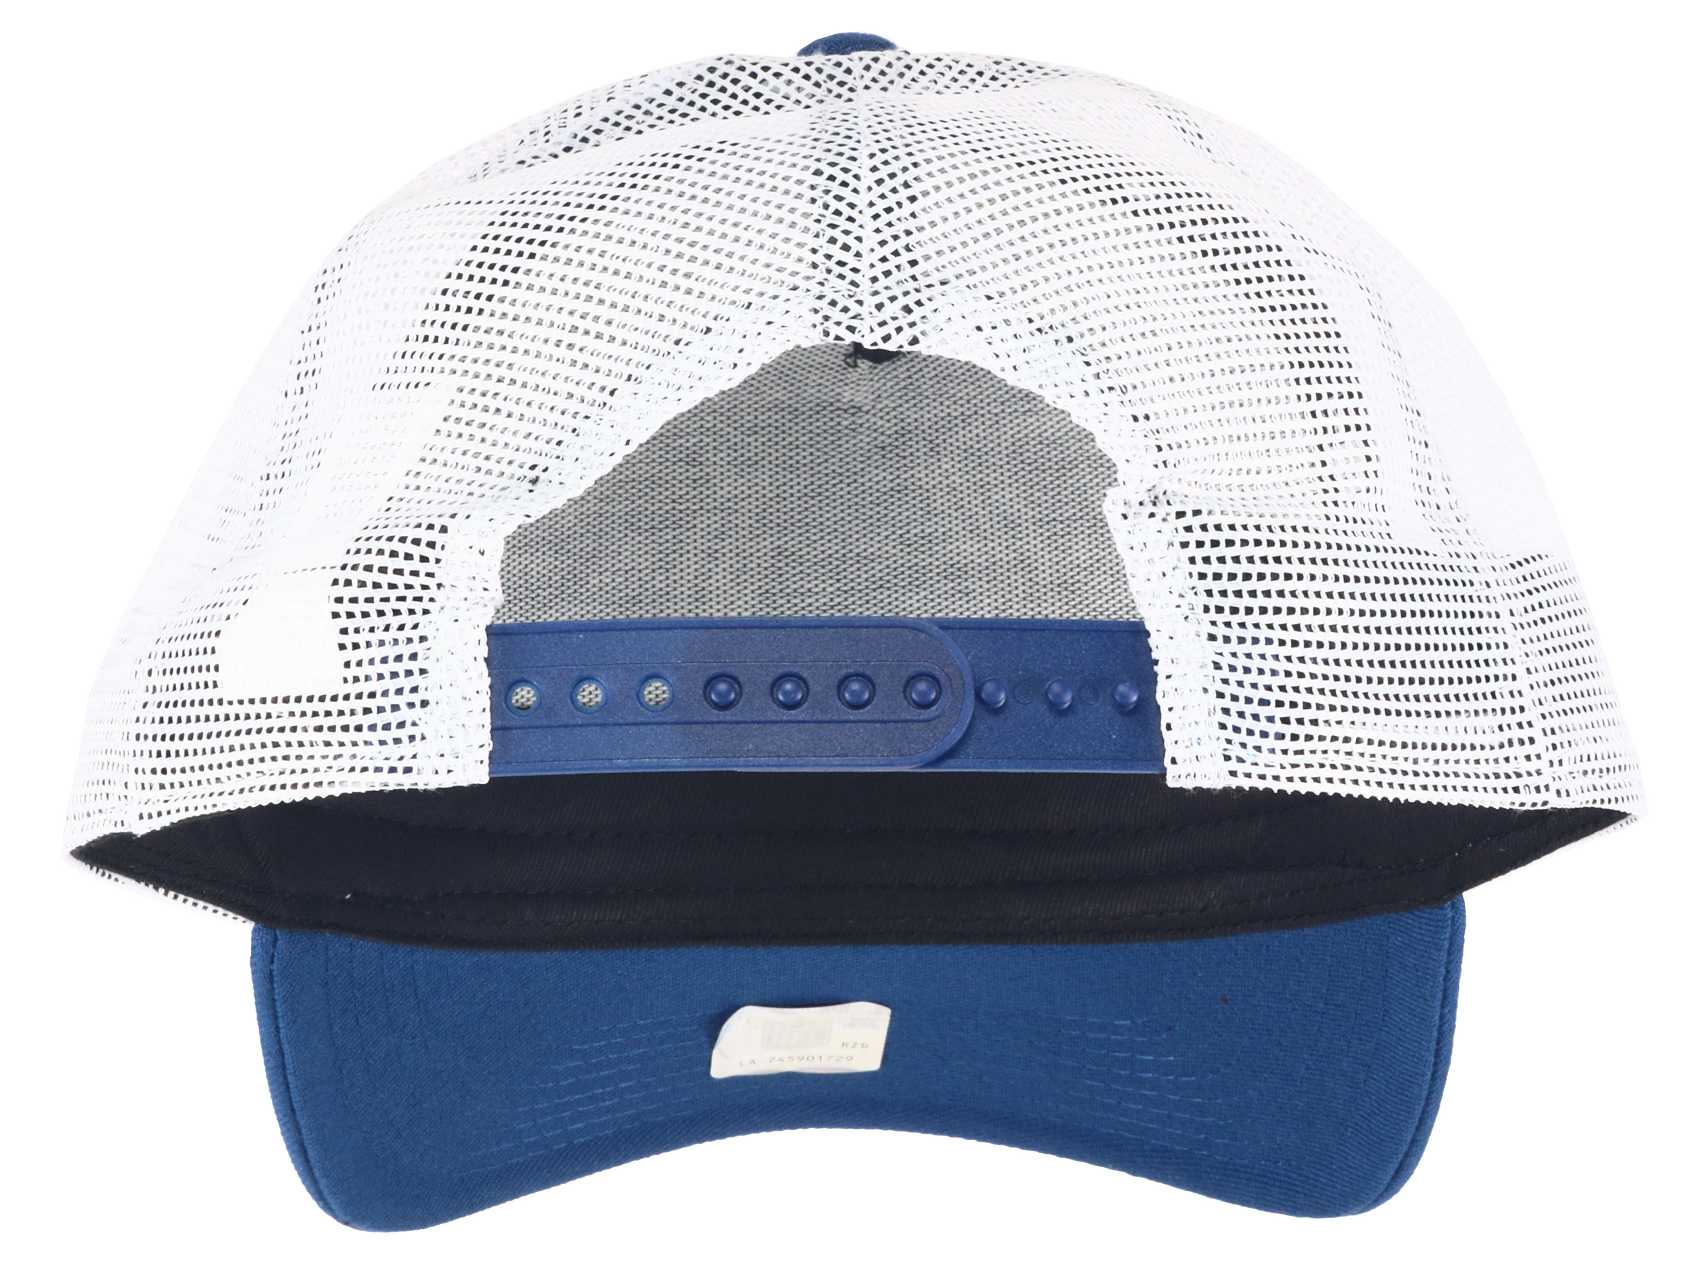 Indianapolis Colts NFL White Mesh Trucker 9Forty A-Frame Trucker Cap New Era